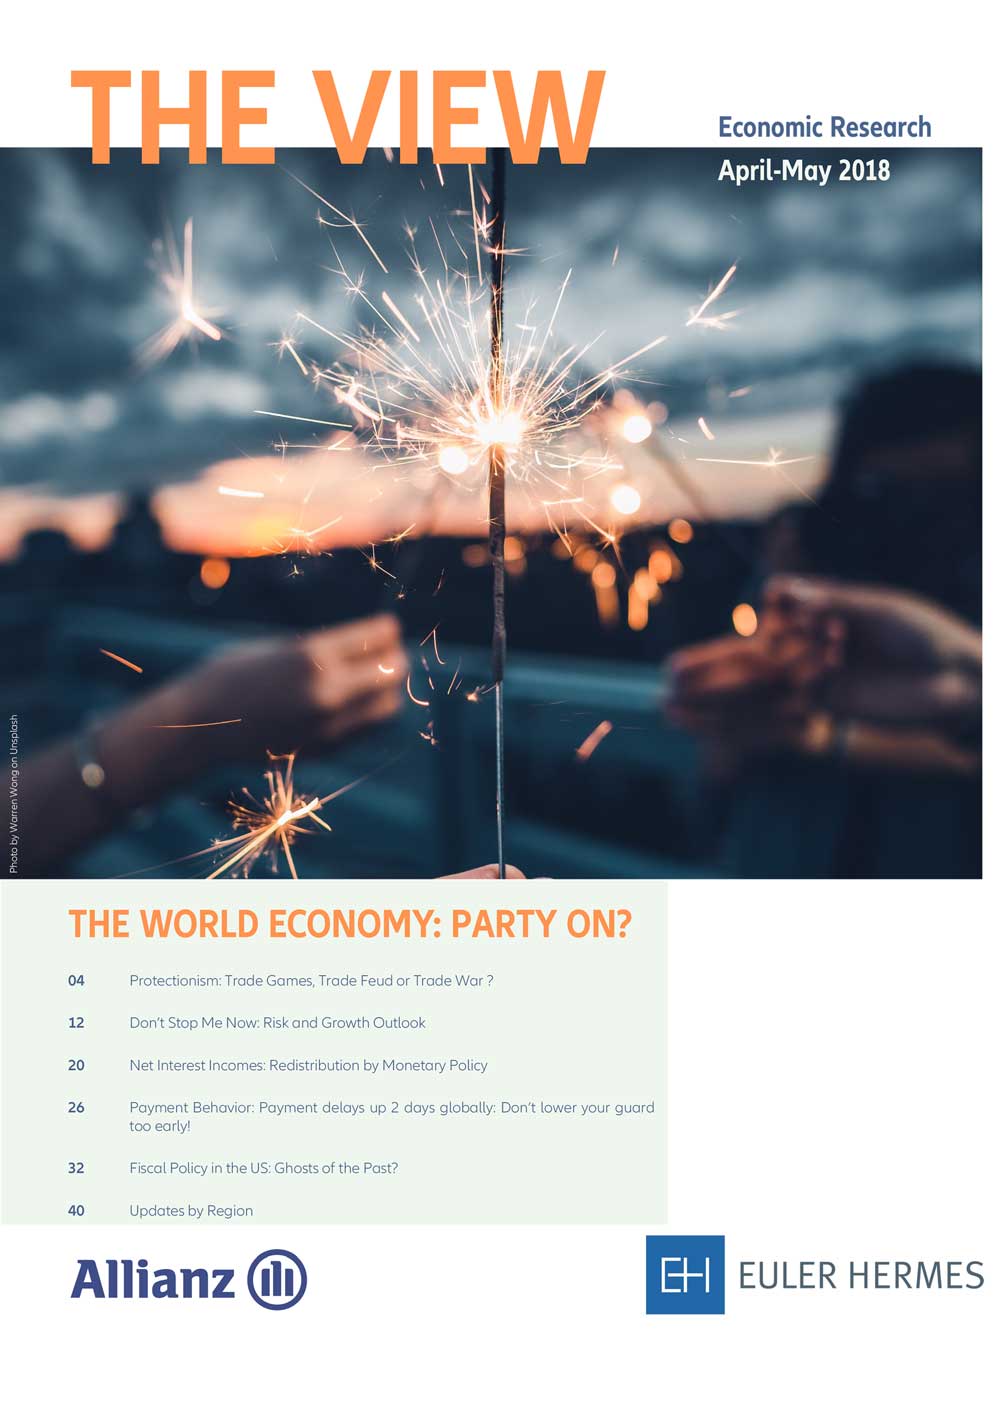 The world economy: party on?